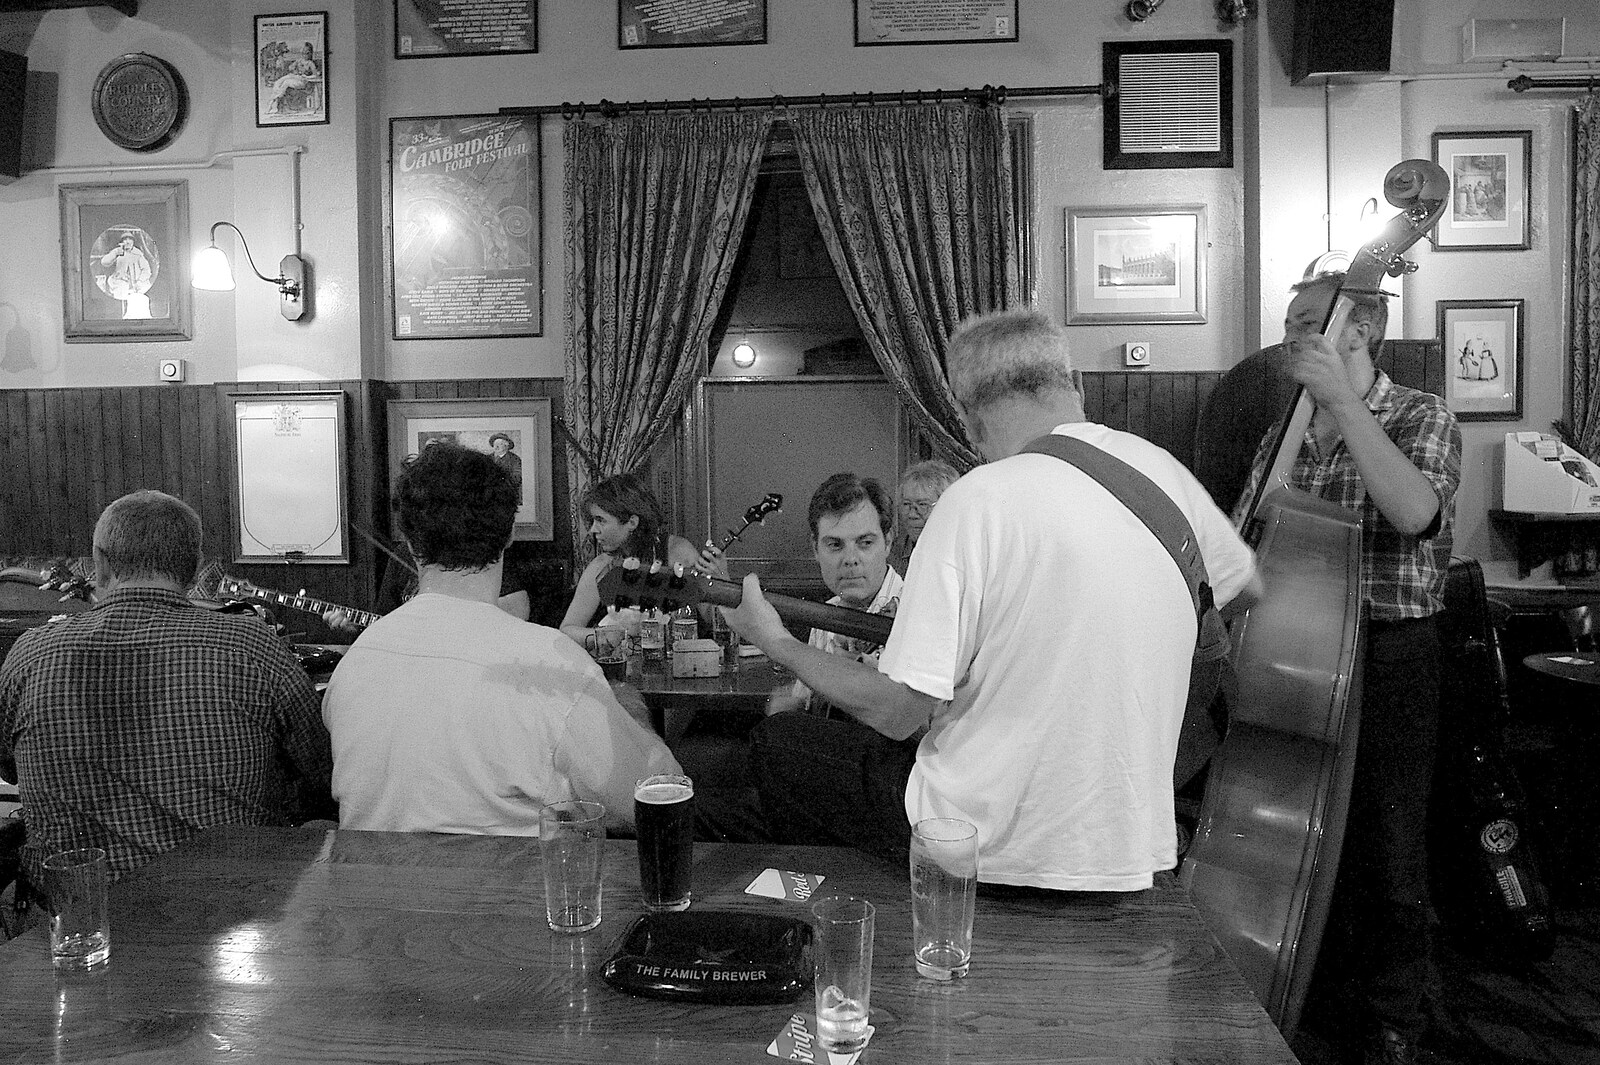 More folk music in the Salisbury Arms from Baits Bite Lock, Folk Night at the Salisbury Arms, and Kebabs, Cambridge - 12th September 2006